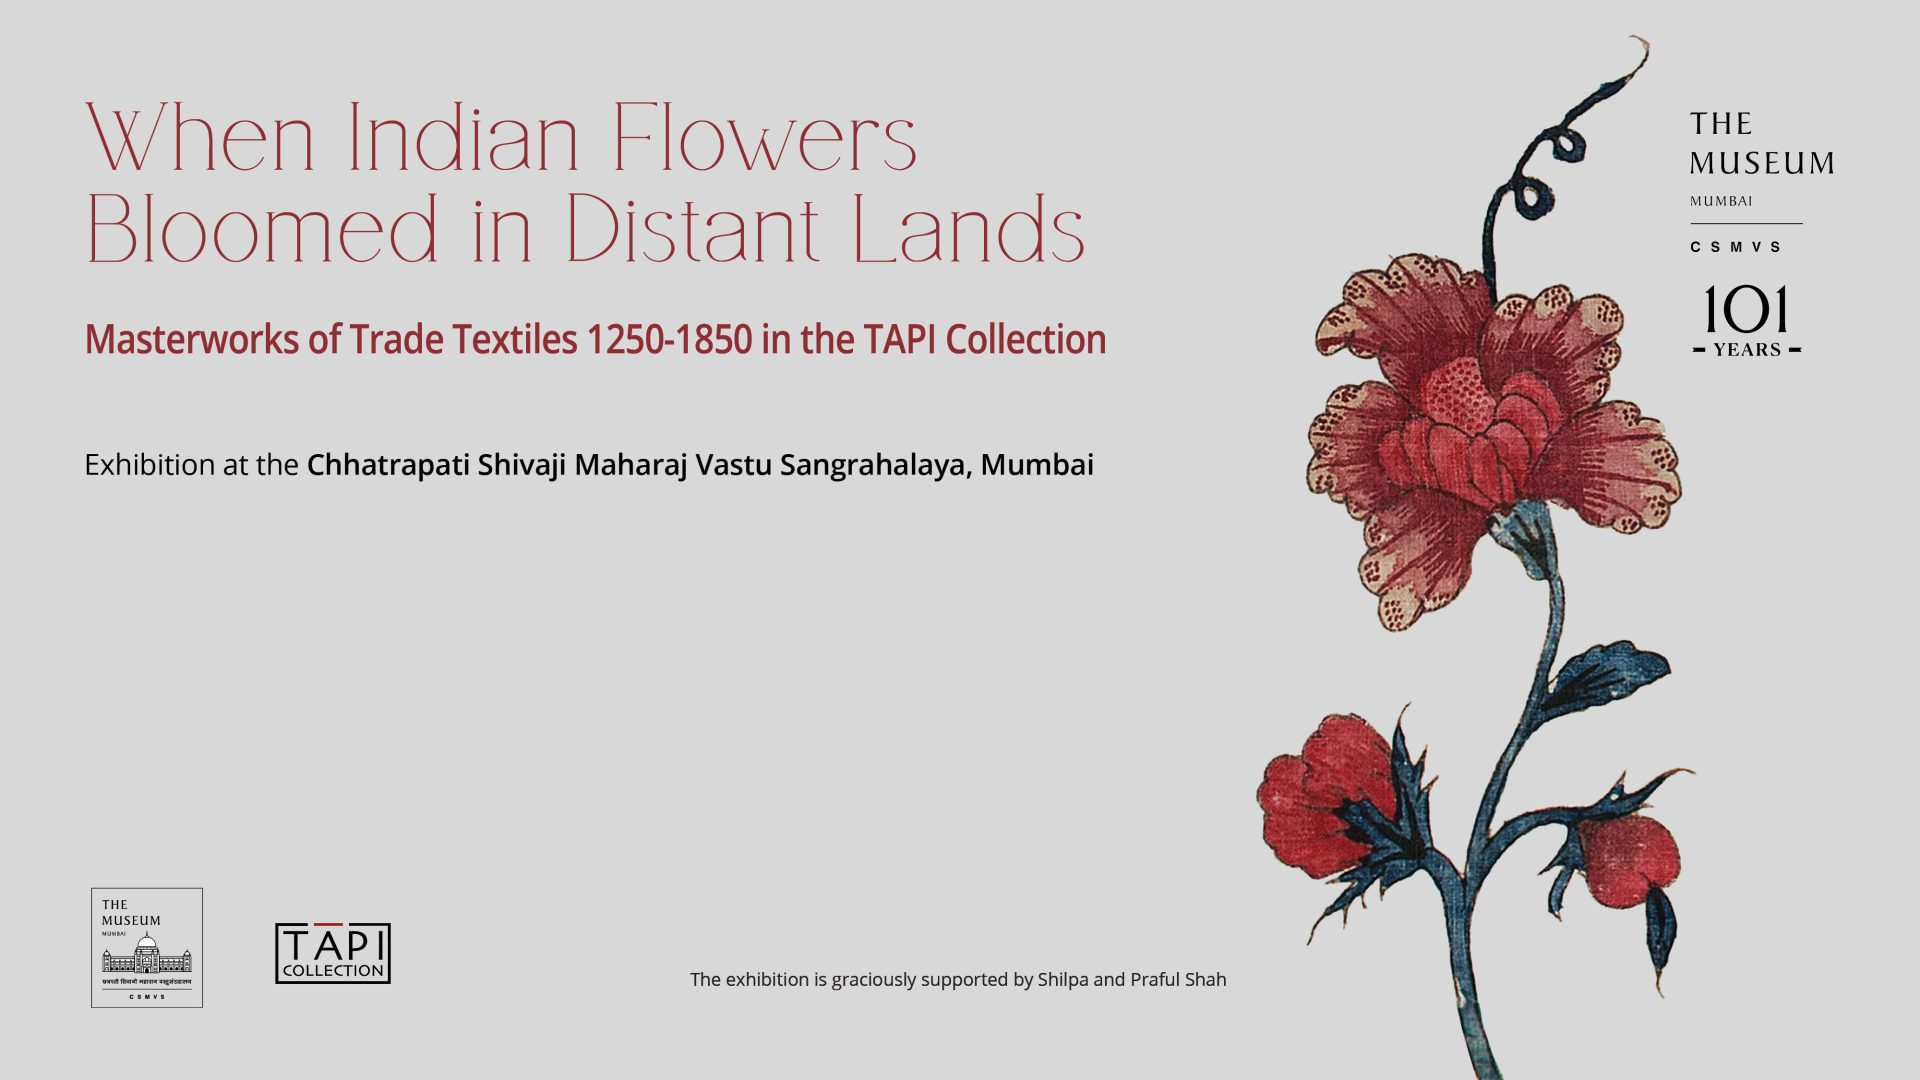 WHEN INDIAN FLOWERS BLOOMED IN DISTANT LANDS